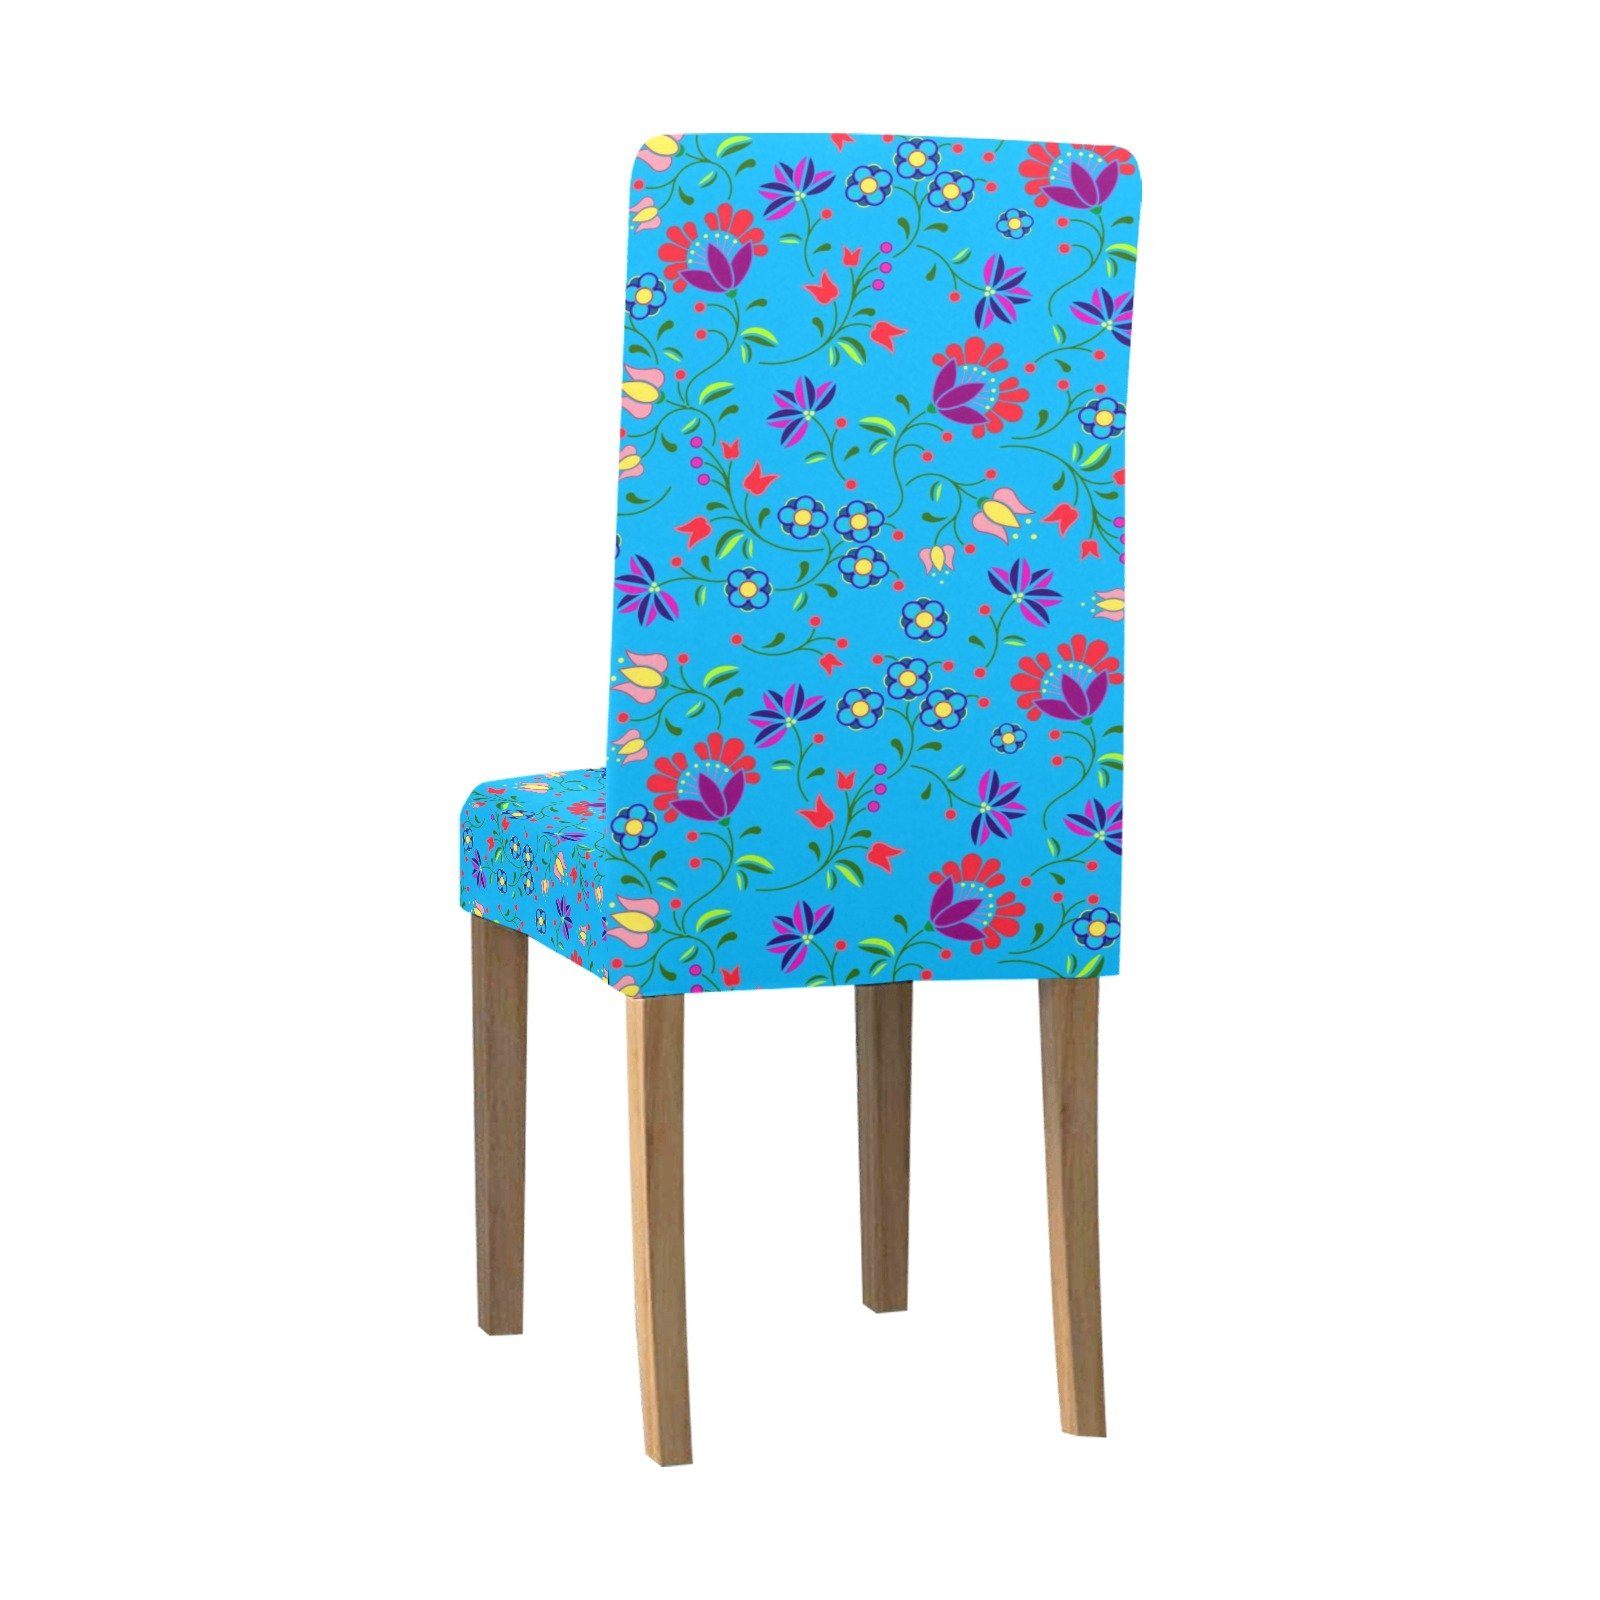 Fleur Indigine Ciel Chair Cover (Pack of 6) Chair Cover (Pack of 6) e-joyer 